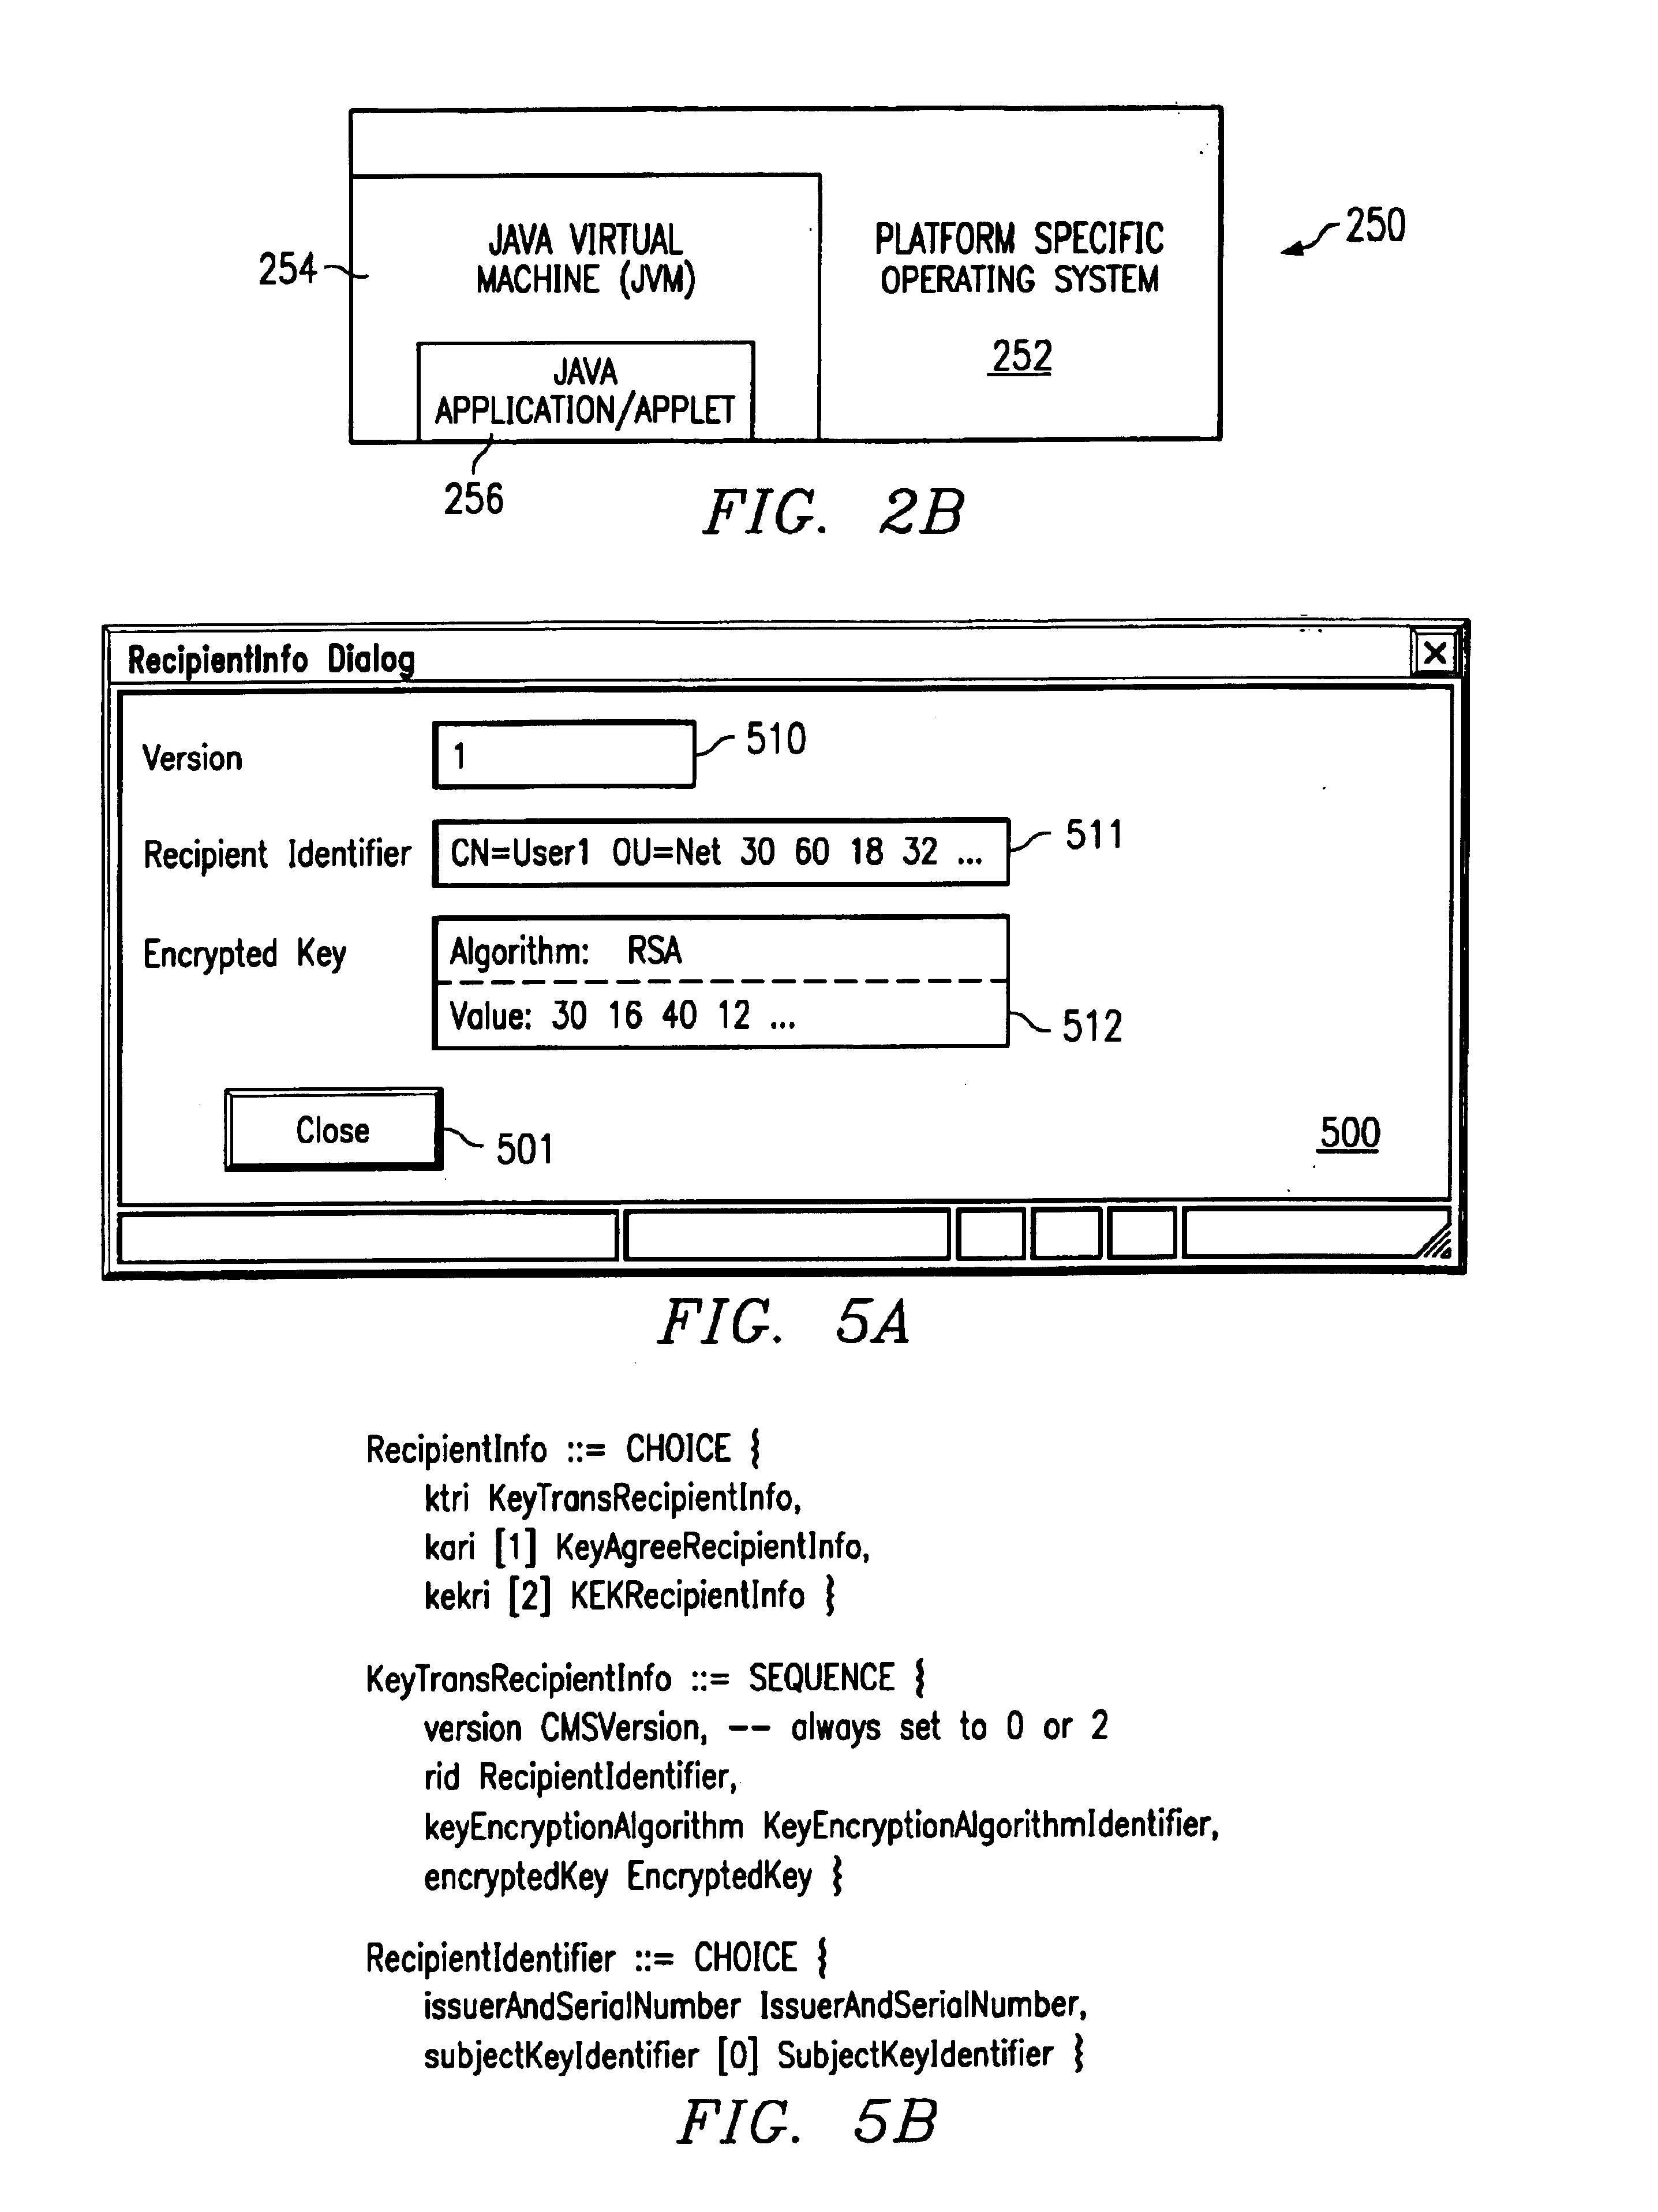 Method and system for presentation and manipulation of PKCS enveloped-data objects